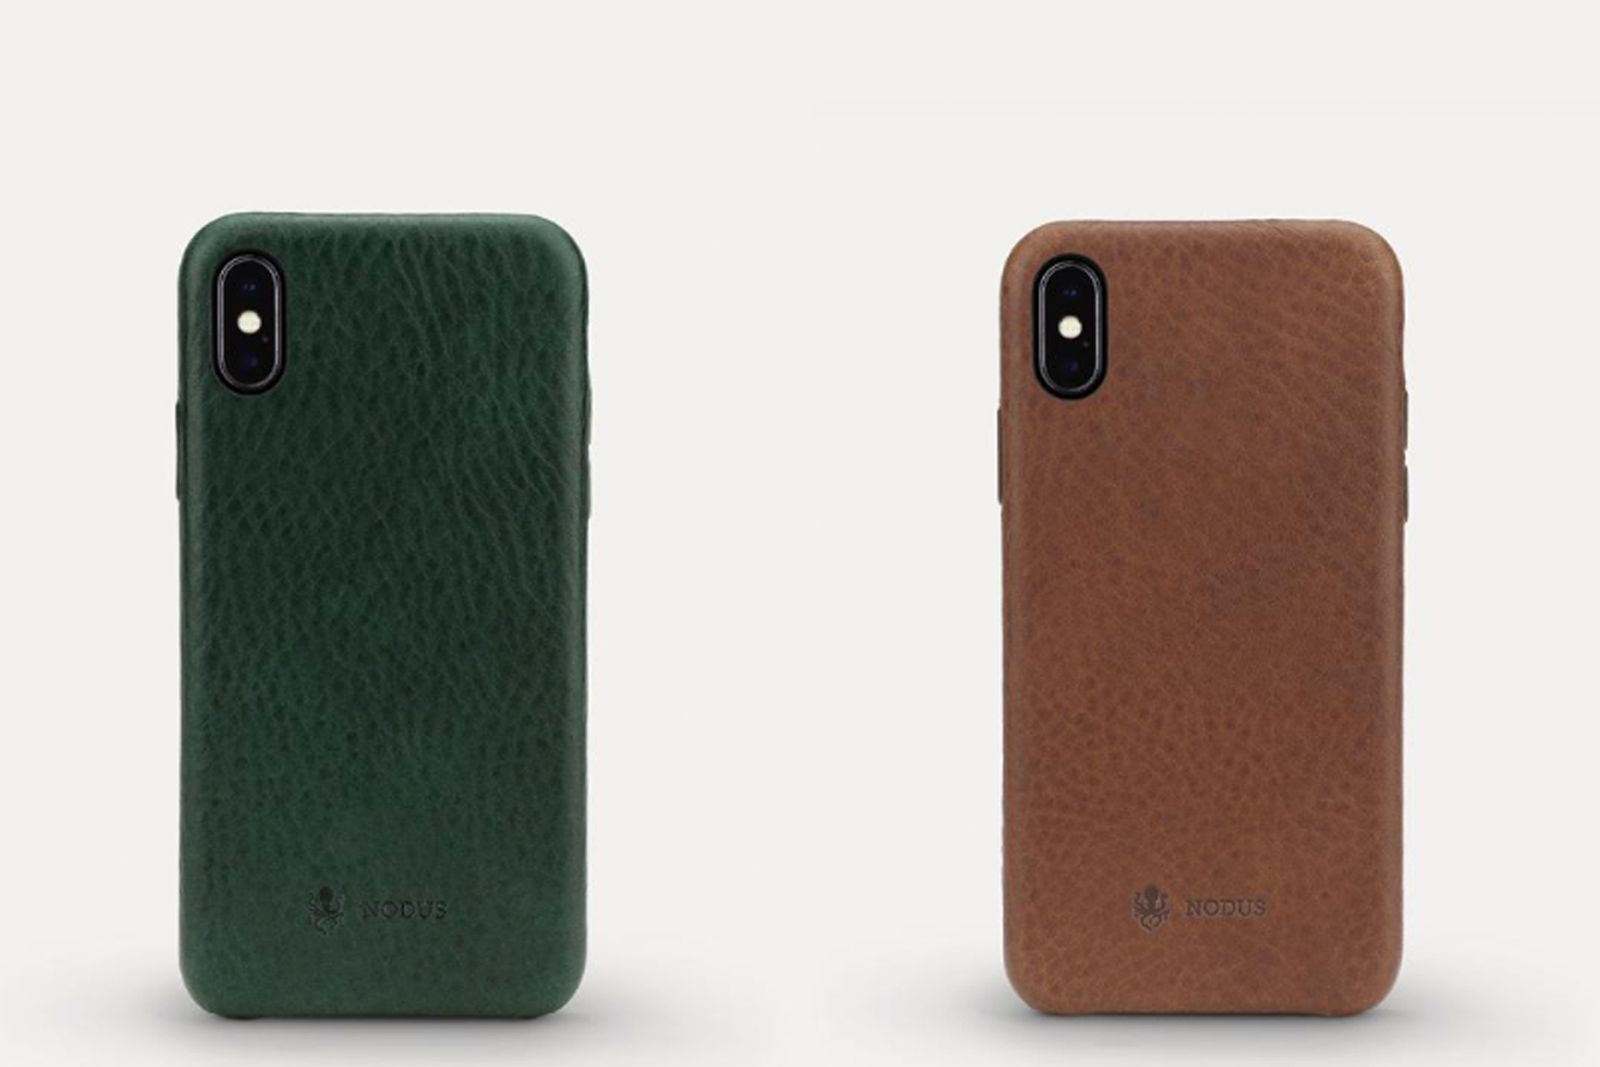 Best Iphone Xs And Xs Max Cases Protect Your New Apple Smartphone image 7